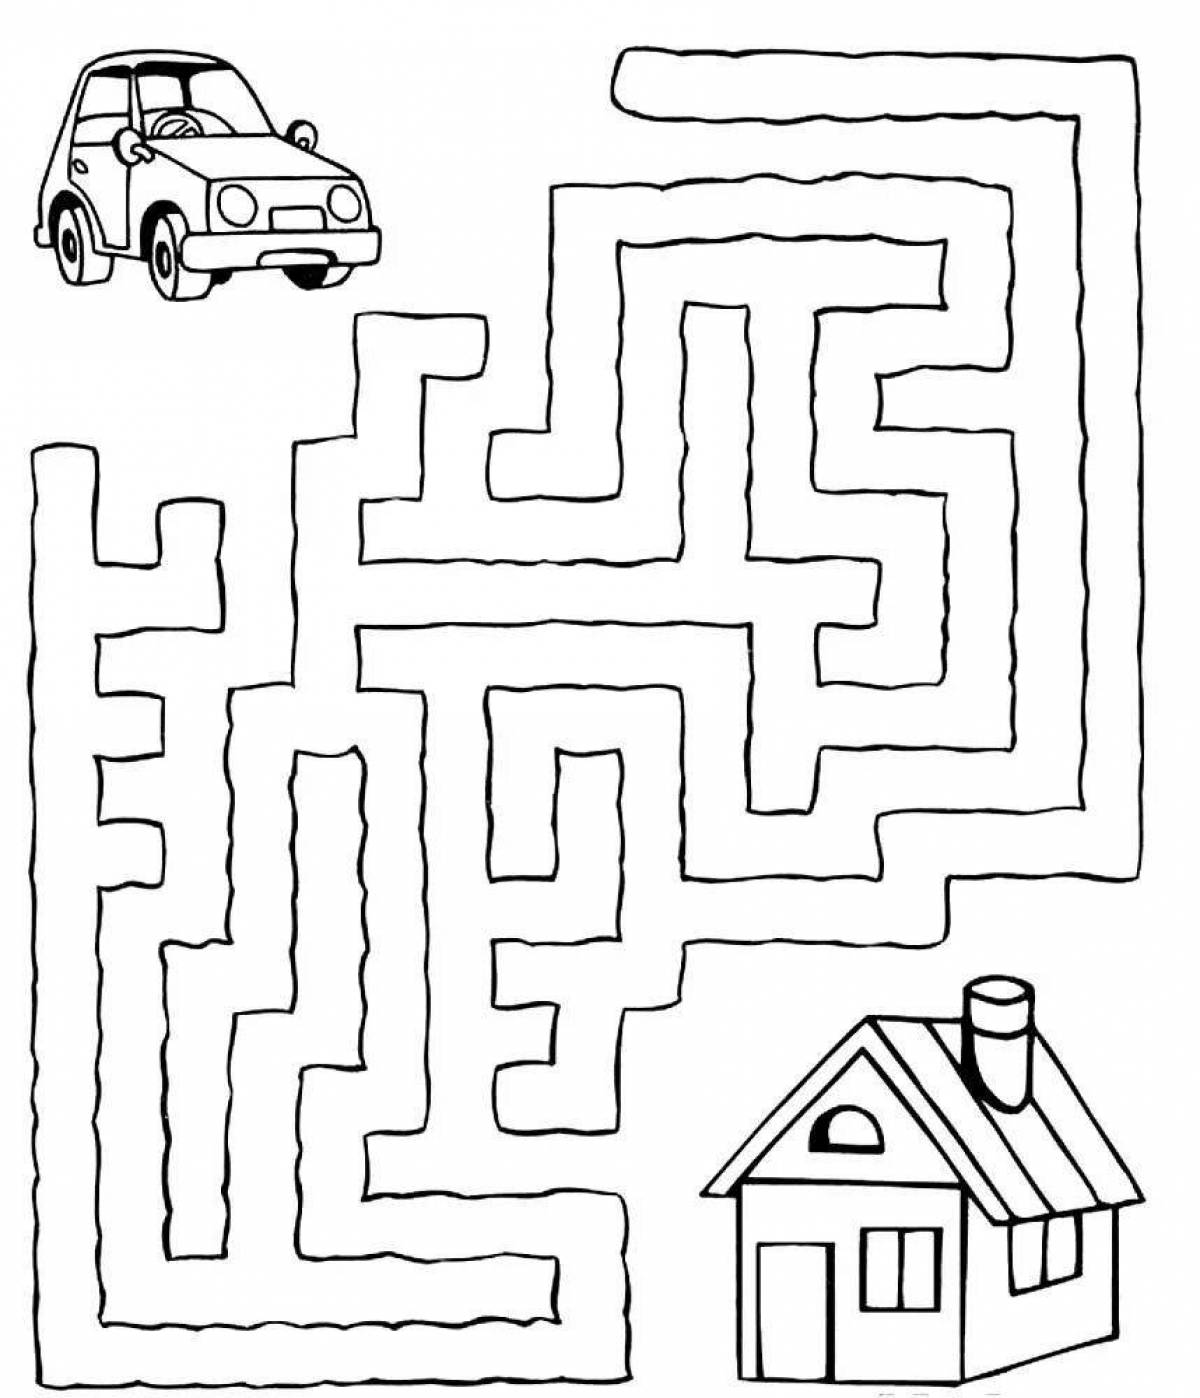 Maze for children 3 4 years old #4